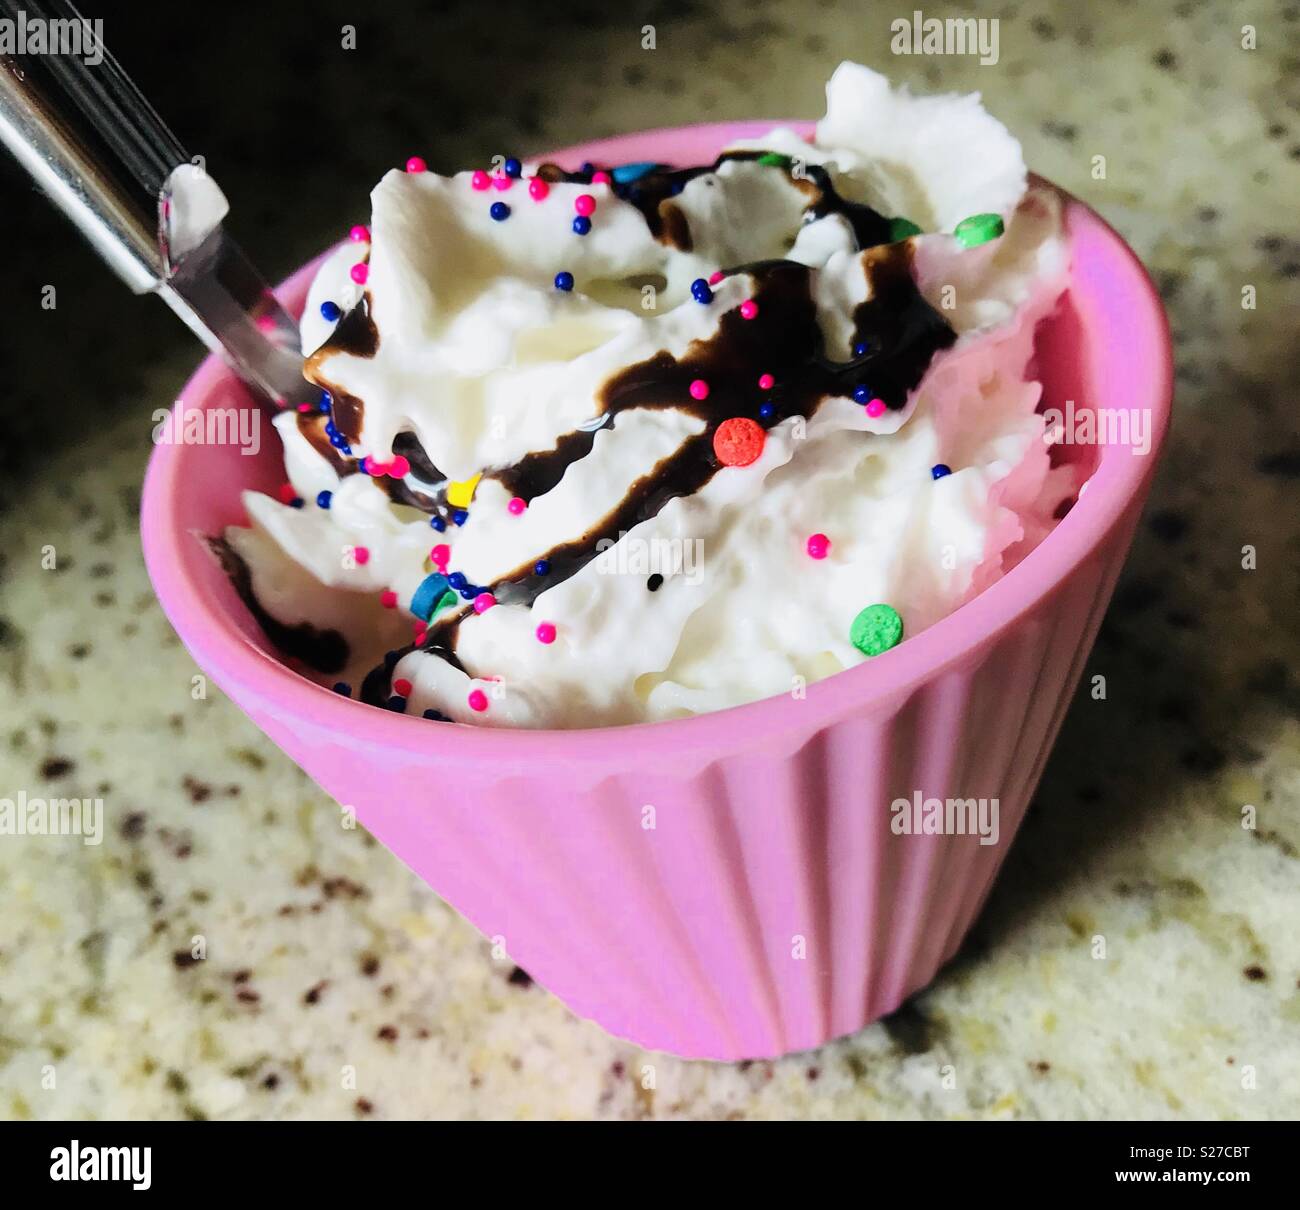 Ice Cream with whipped cream, sprinkles & chocolate syrup! Stock Photo